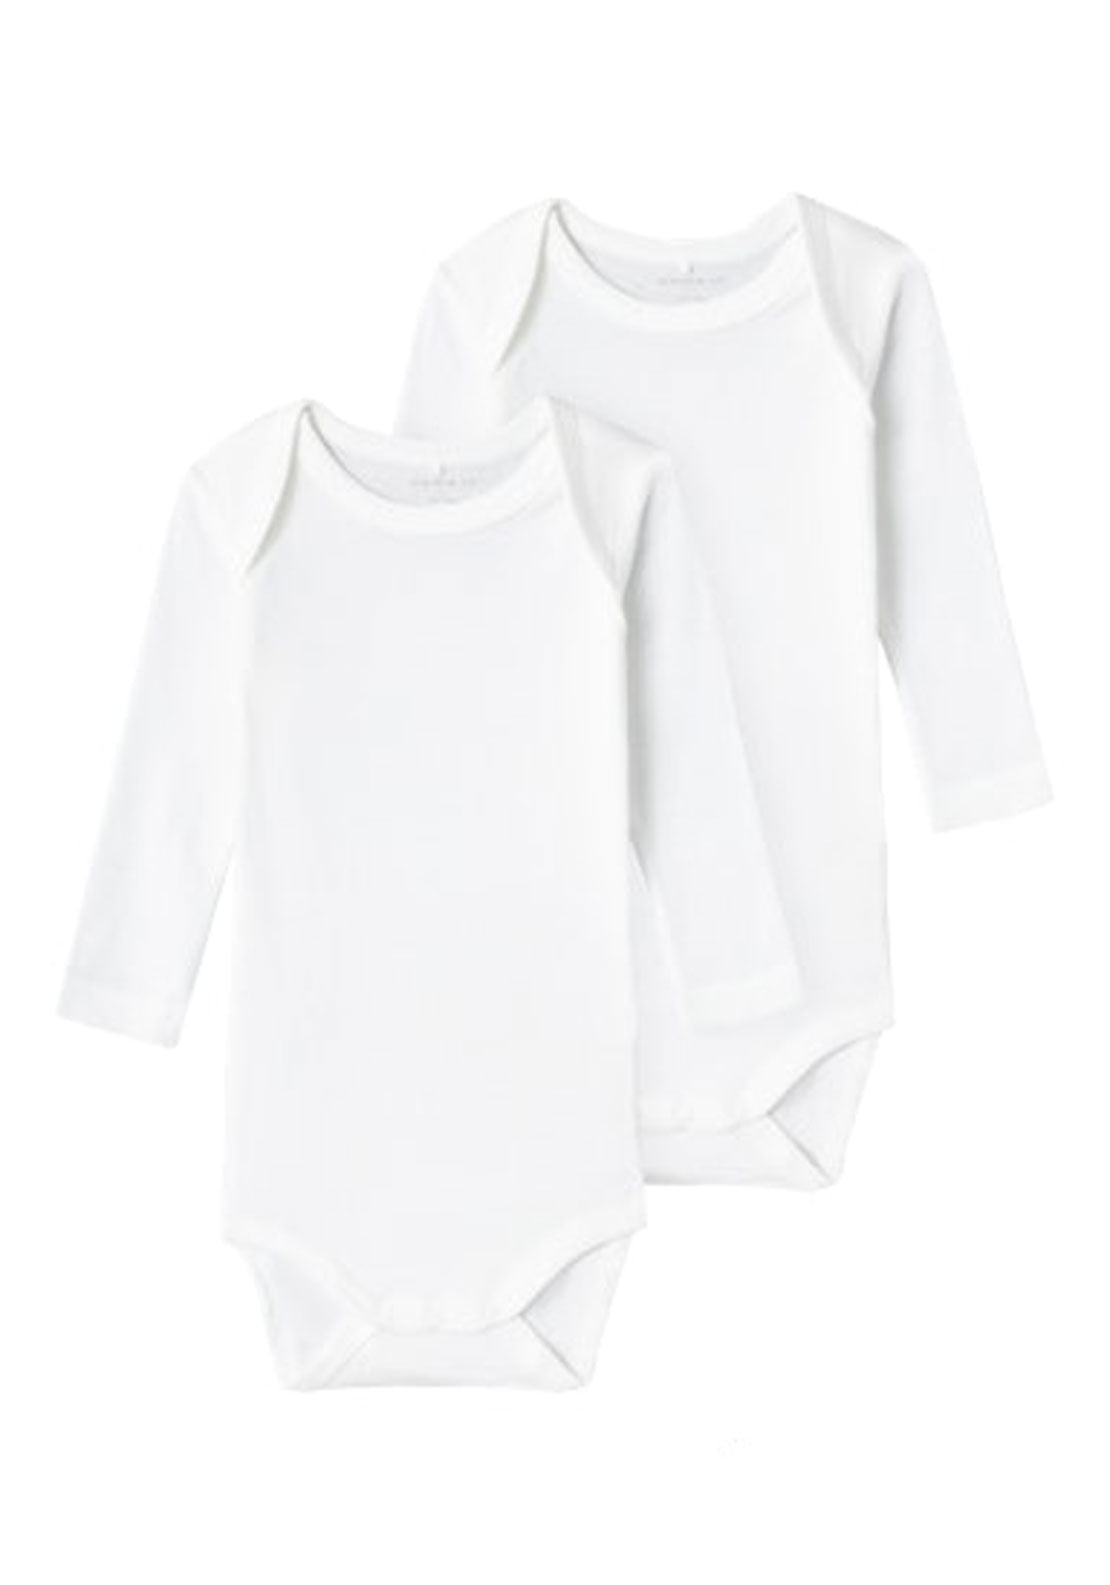 Name It 2 Pack Long Sleeve Bodysuit - White 1 Shaws Department Stores